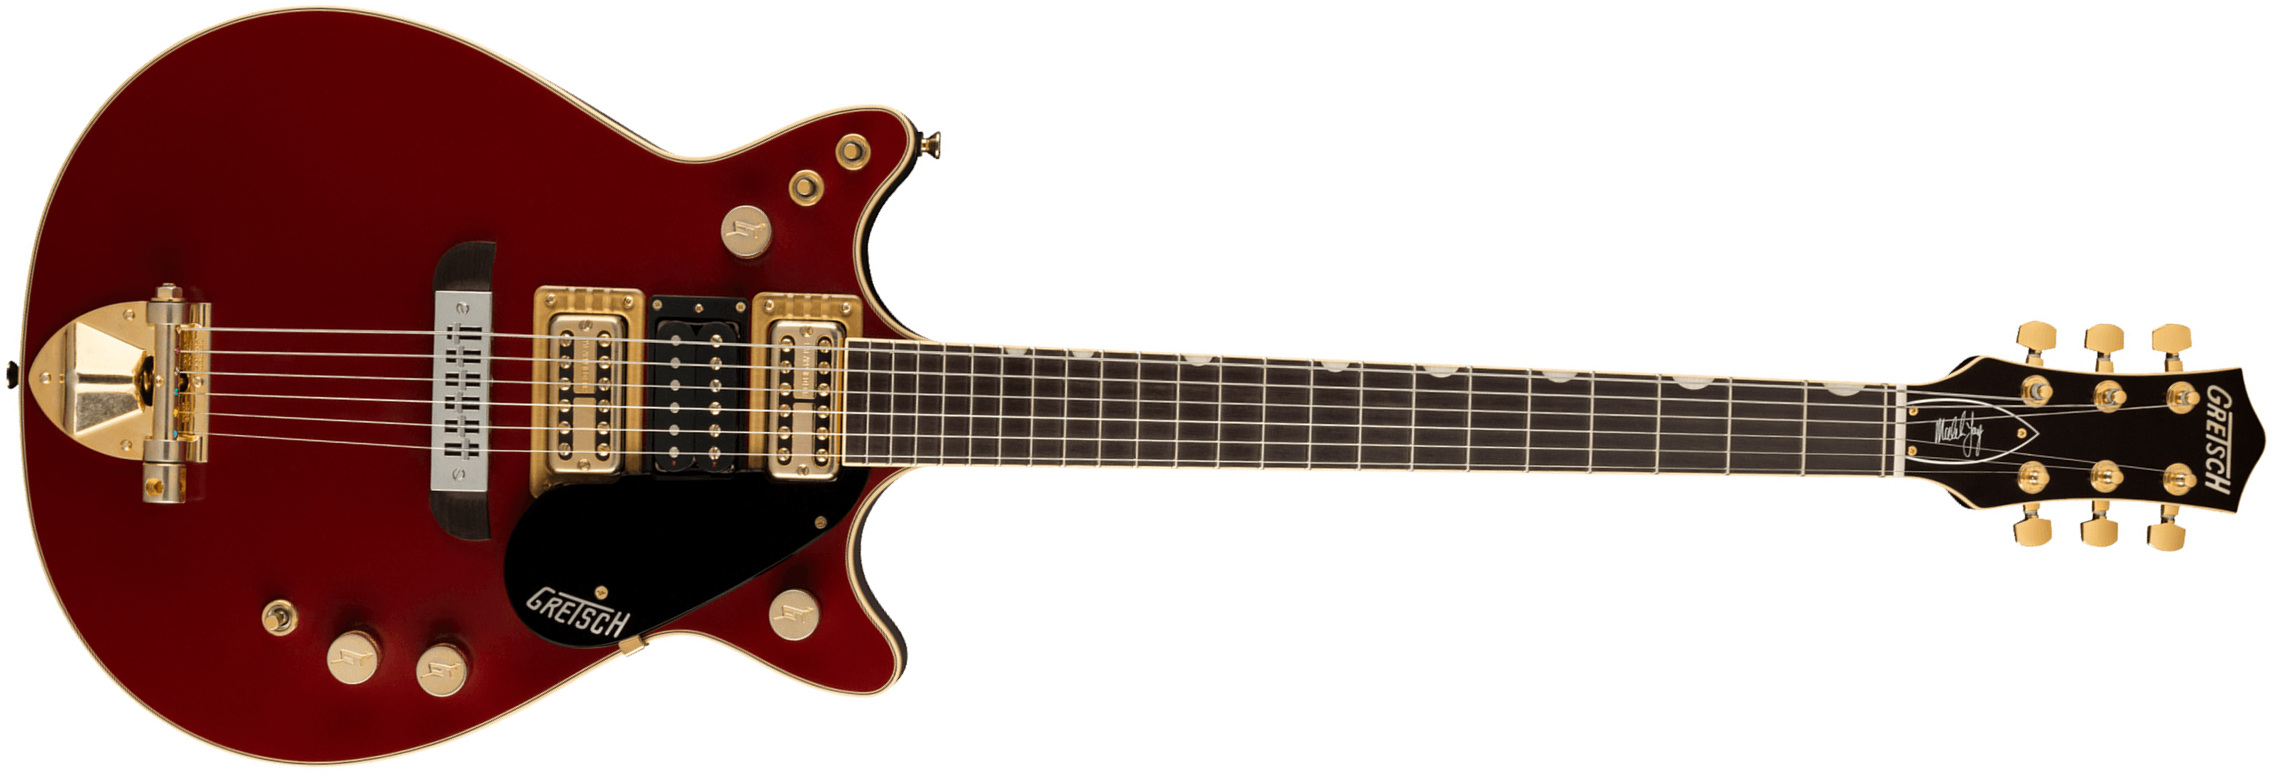 Gretsch Malcolm Young G6131g-my-rb Jet Ltd Signature 3h Ht Eb - Vintage Firebird Red - Double cut electric guitar - Main picture